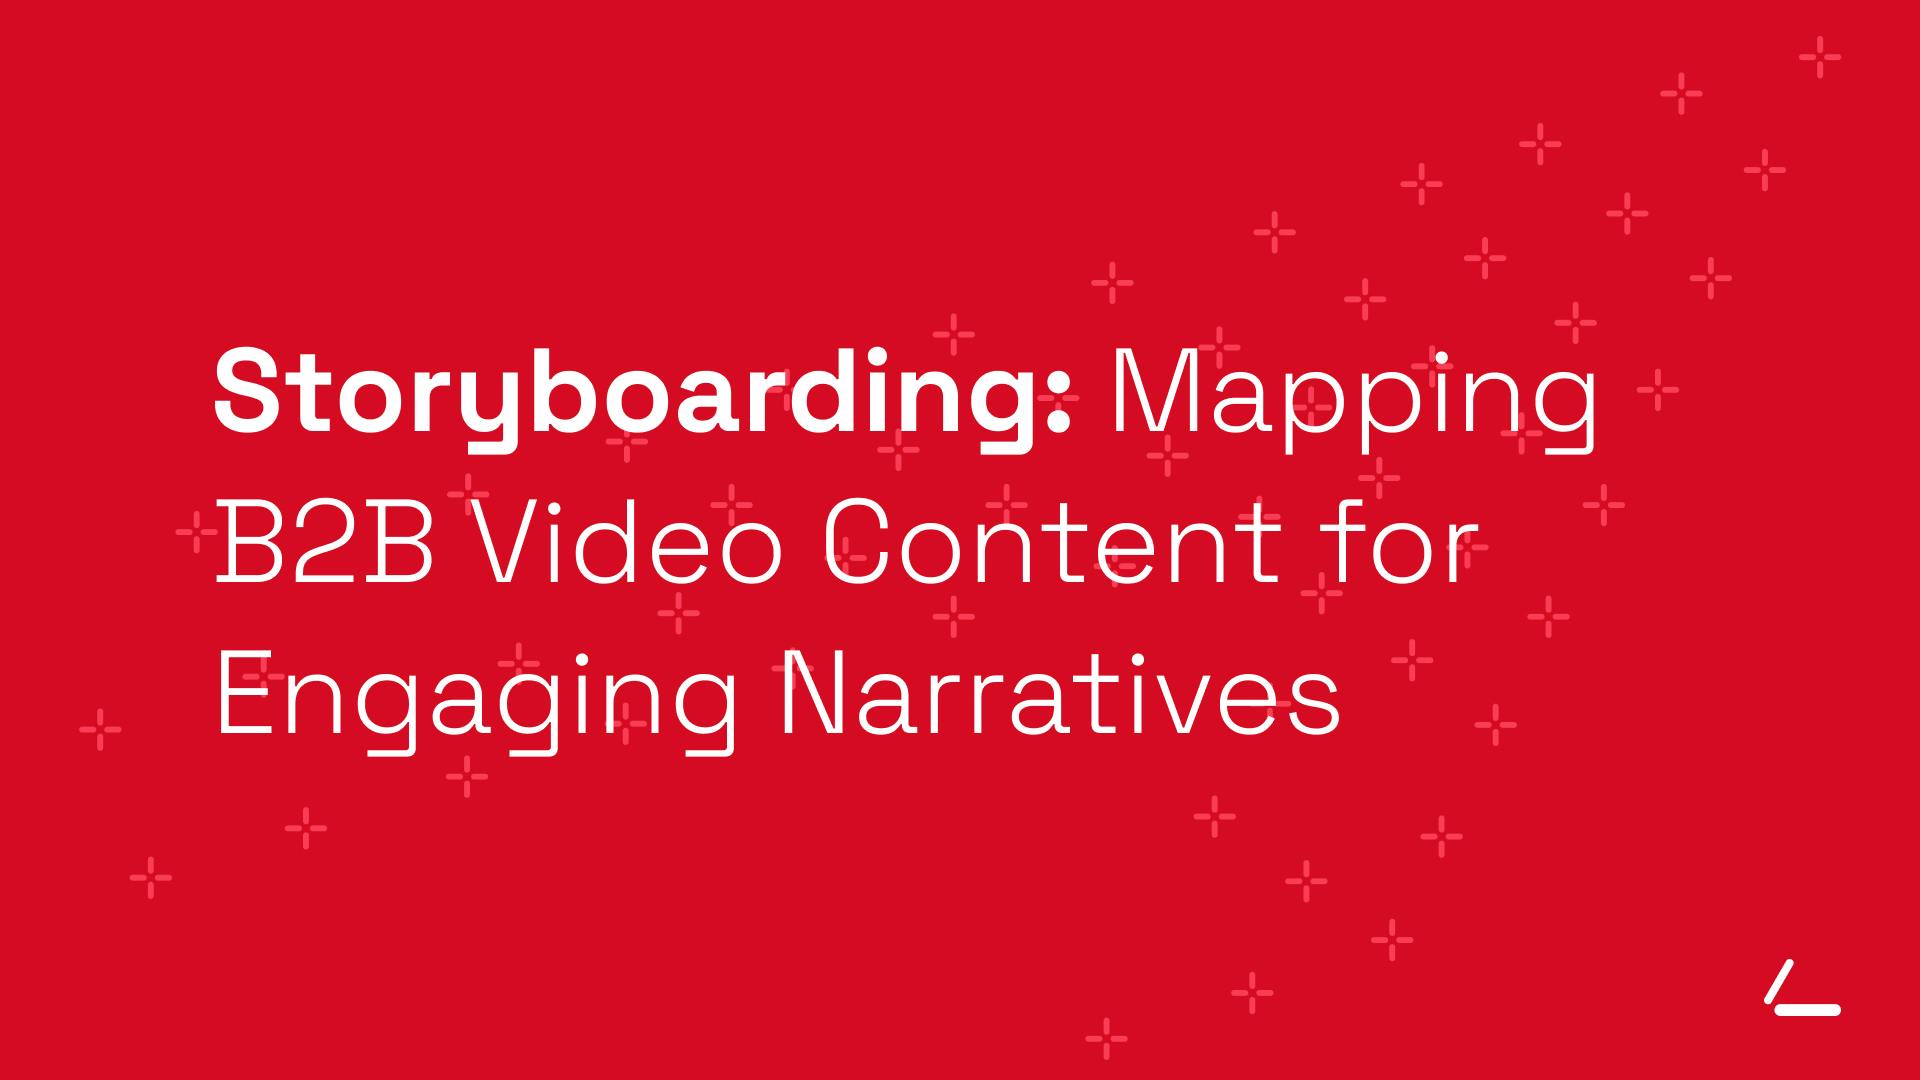 SEO Article Header - Red background with text about Storyboarding